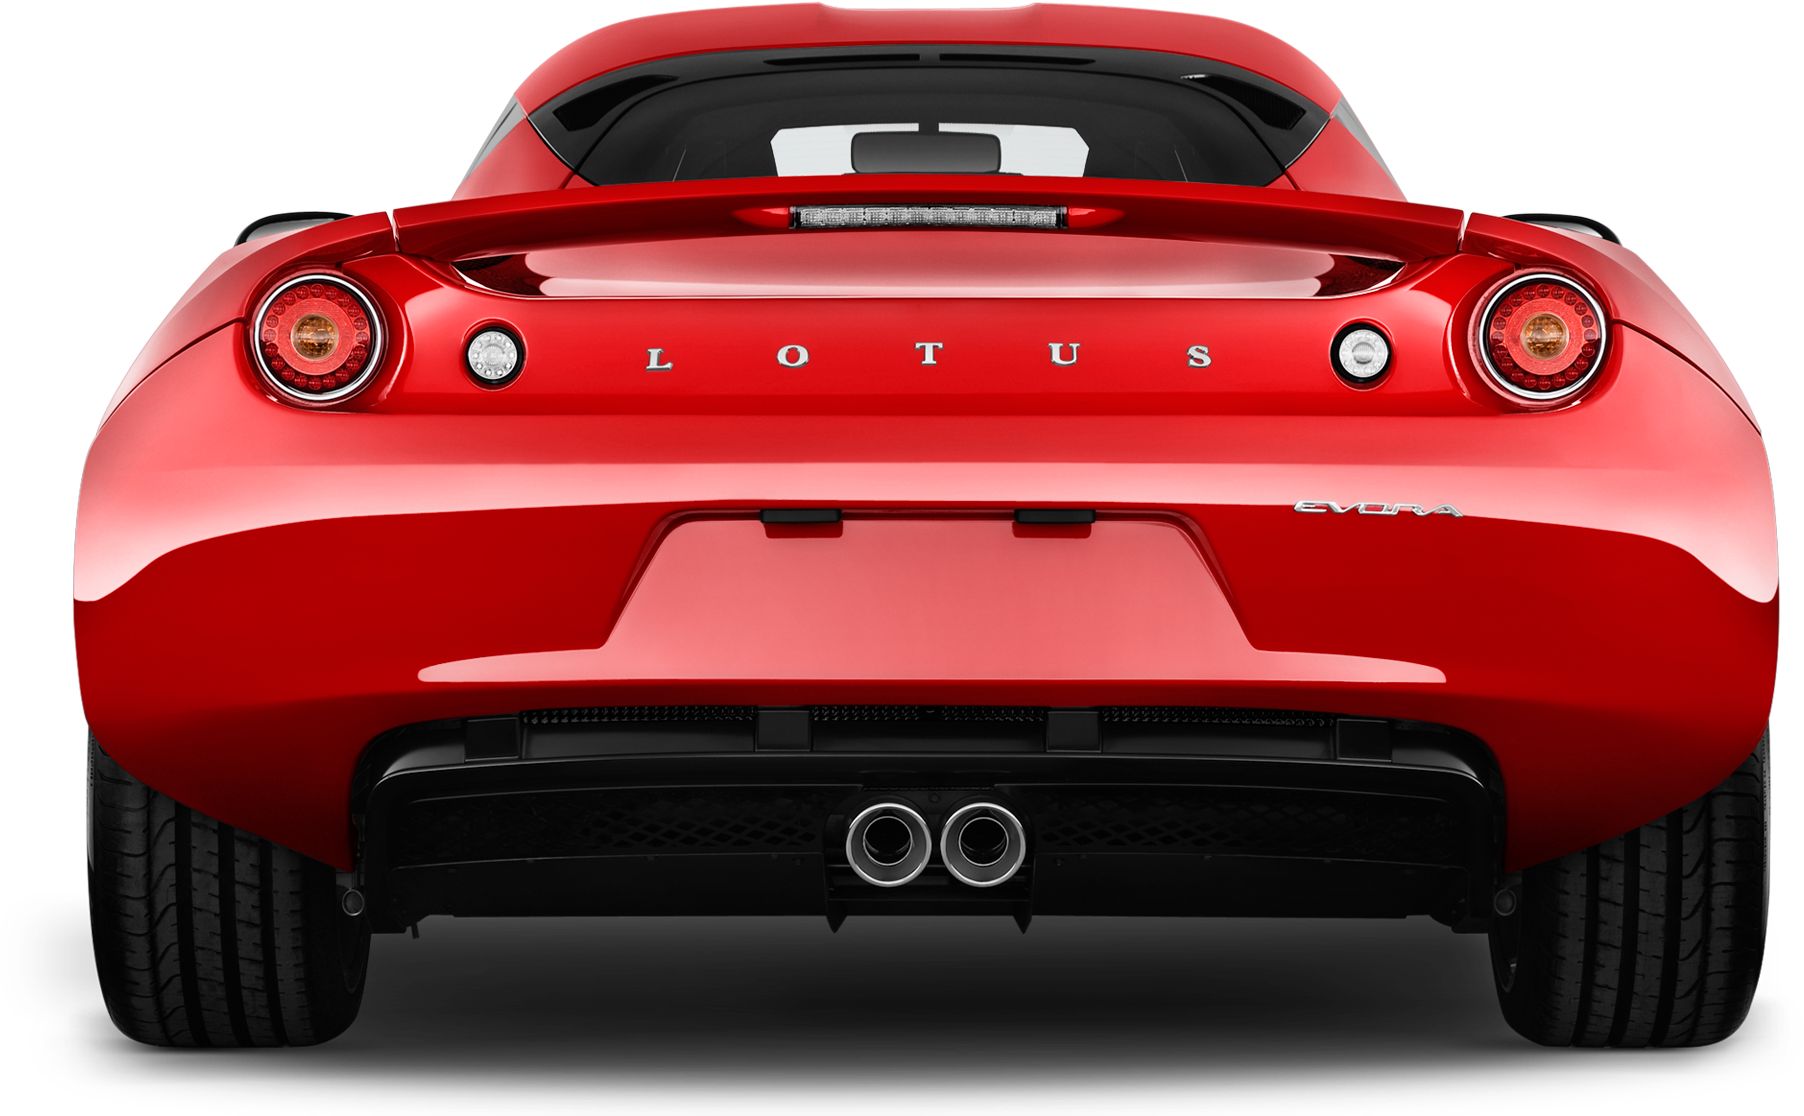 The Back Of A Red Sports Car